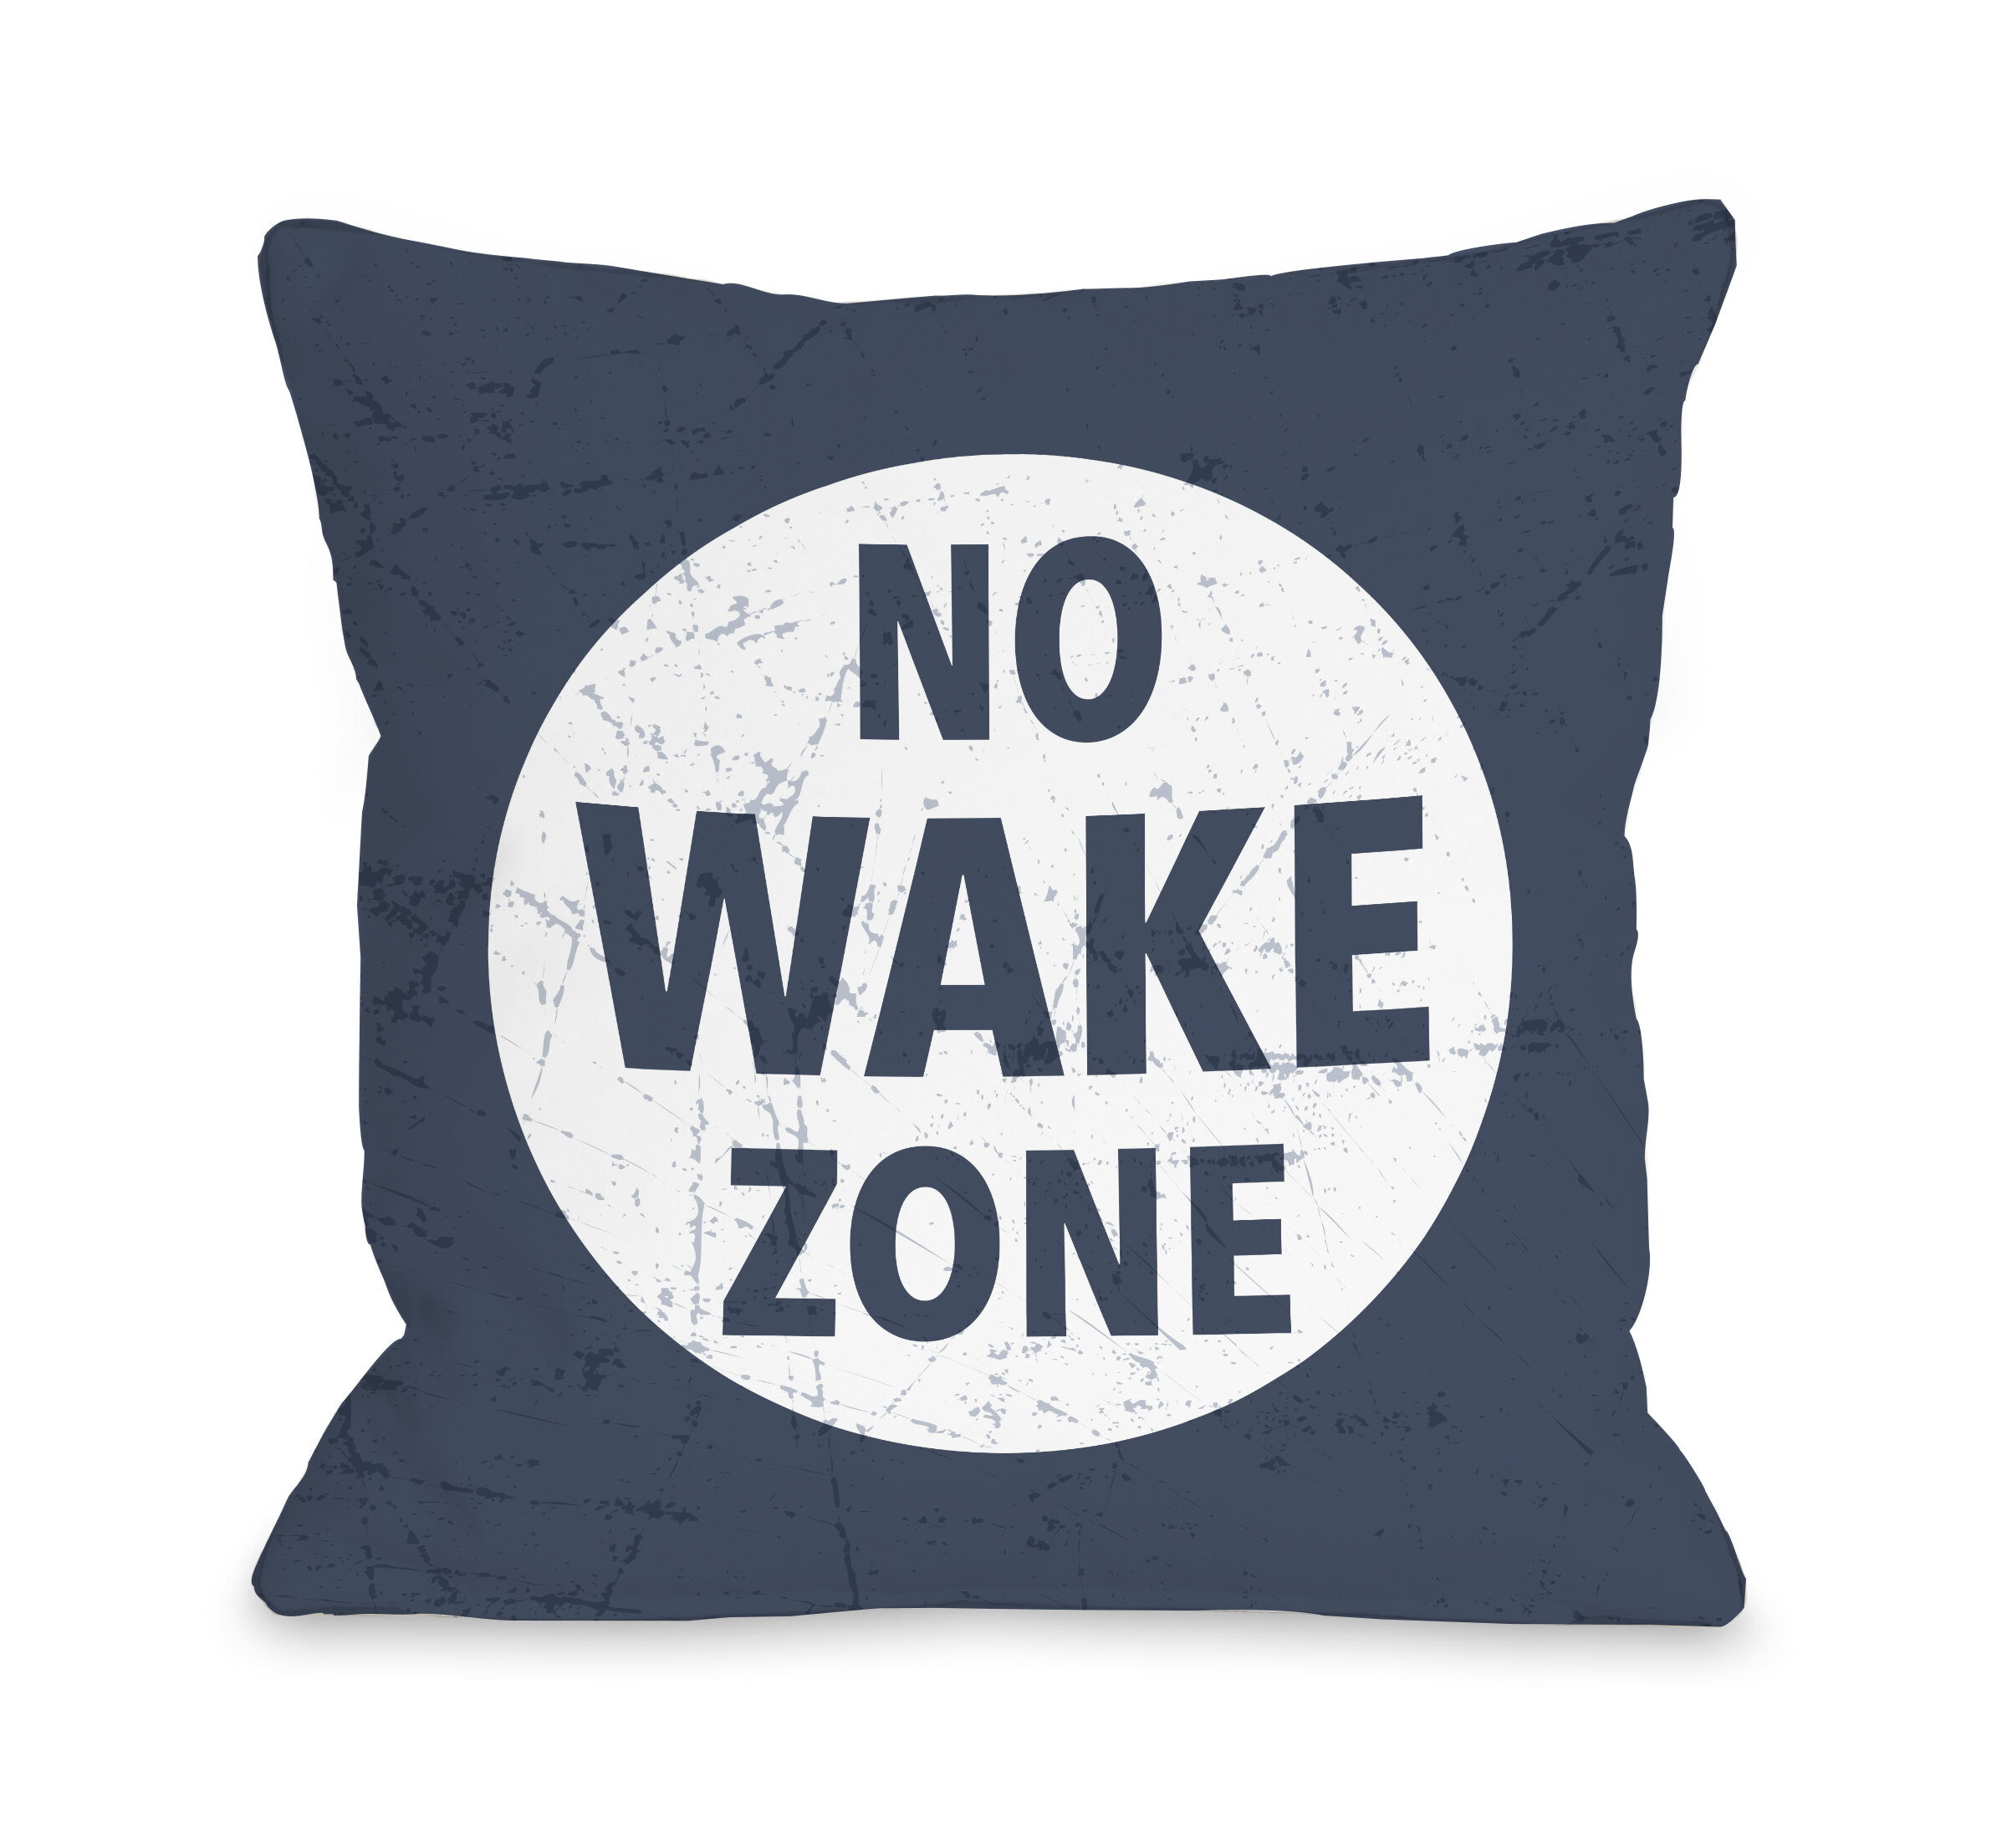 your zone pillows